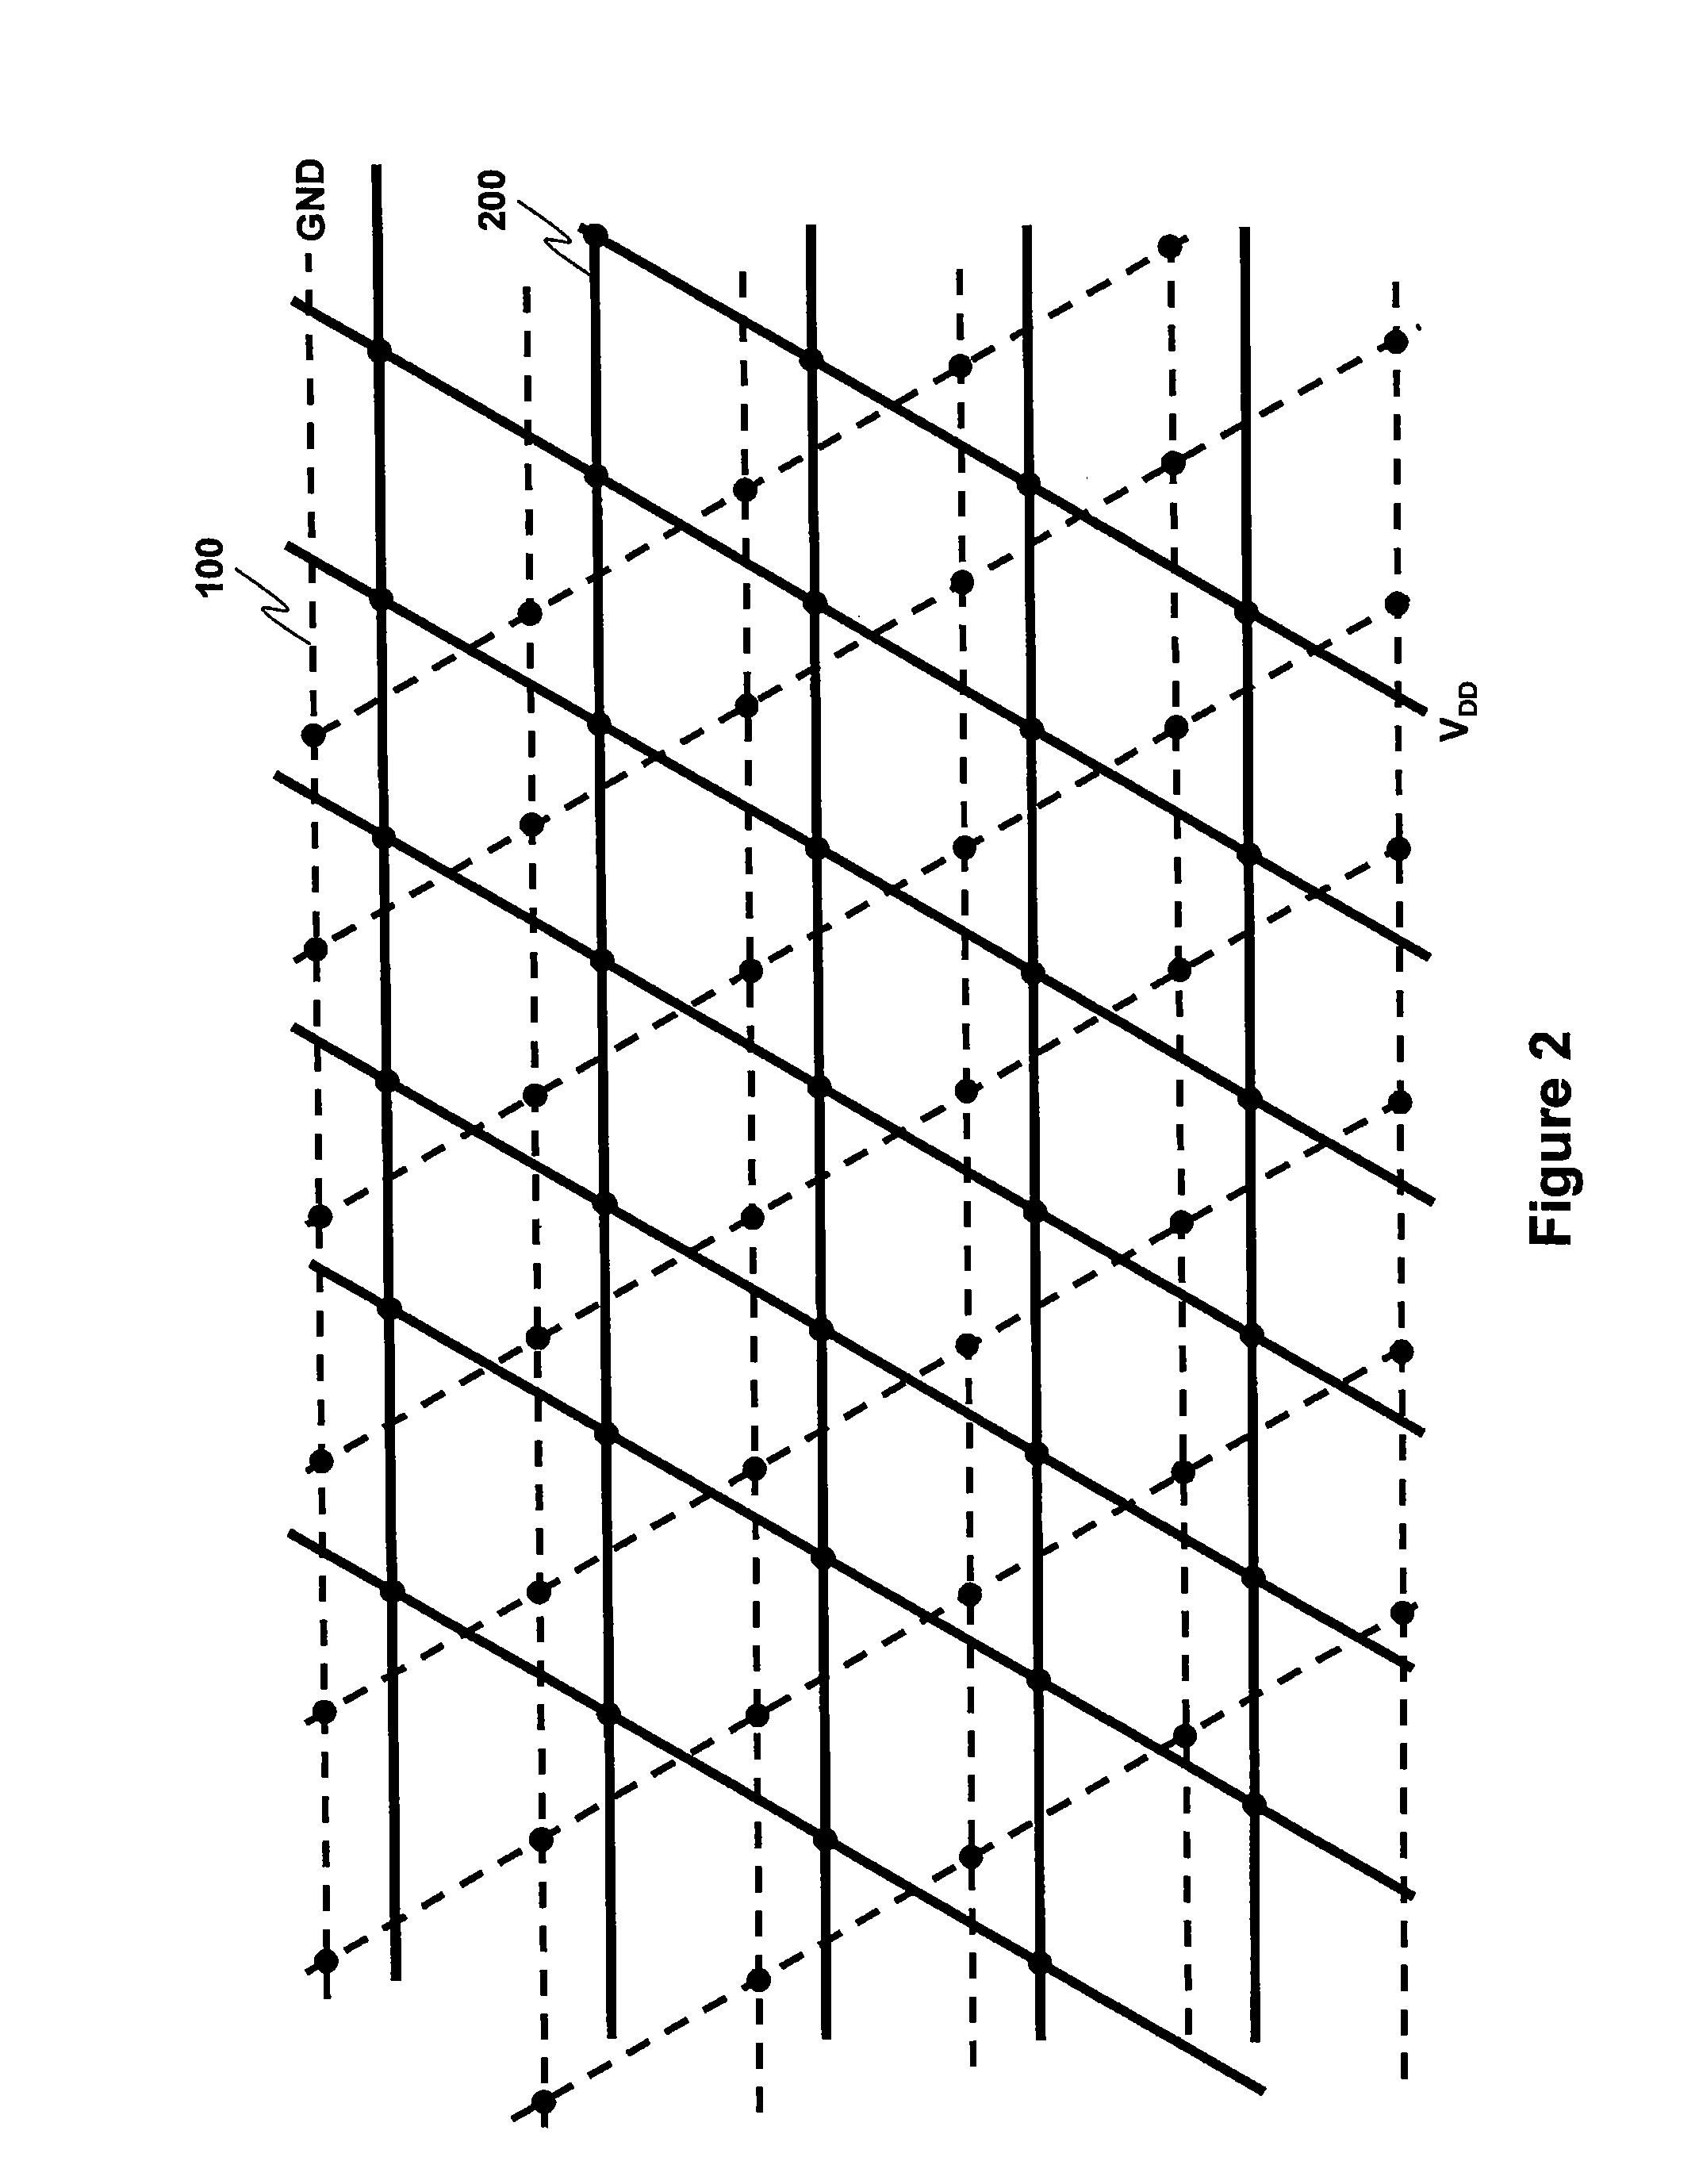 Ceramic substrate grid structure for the creation of virtual coax arrangement